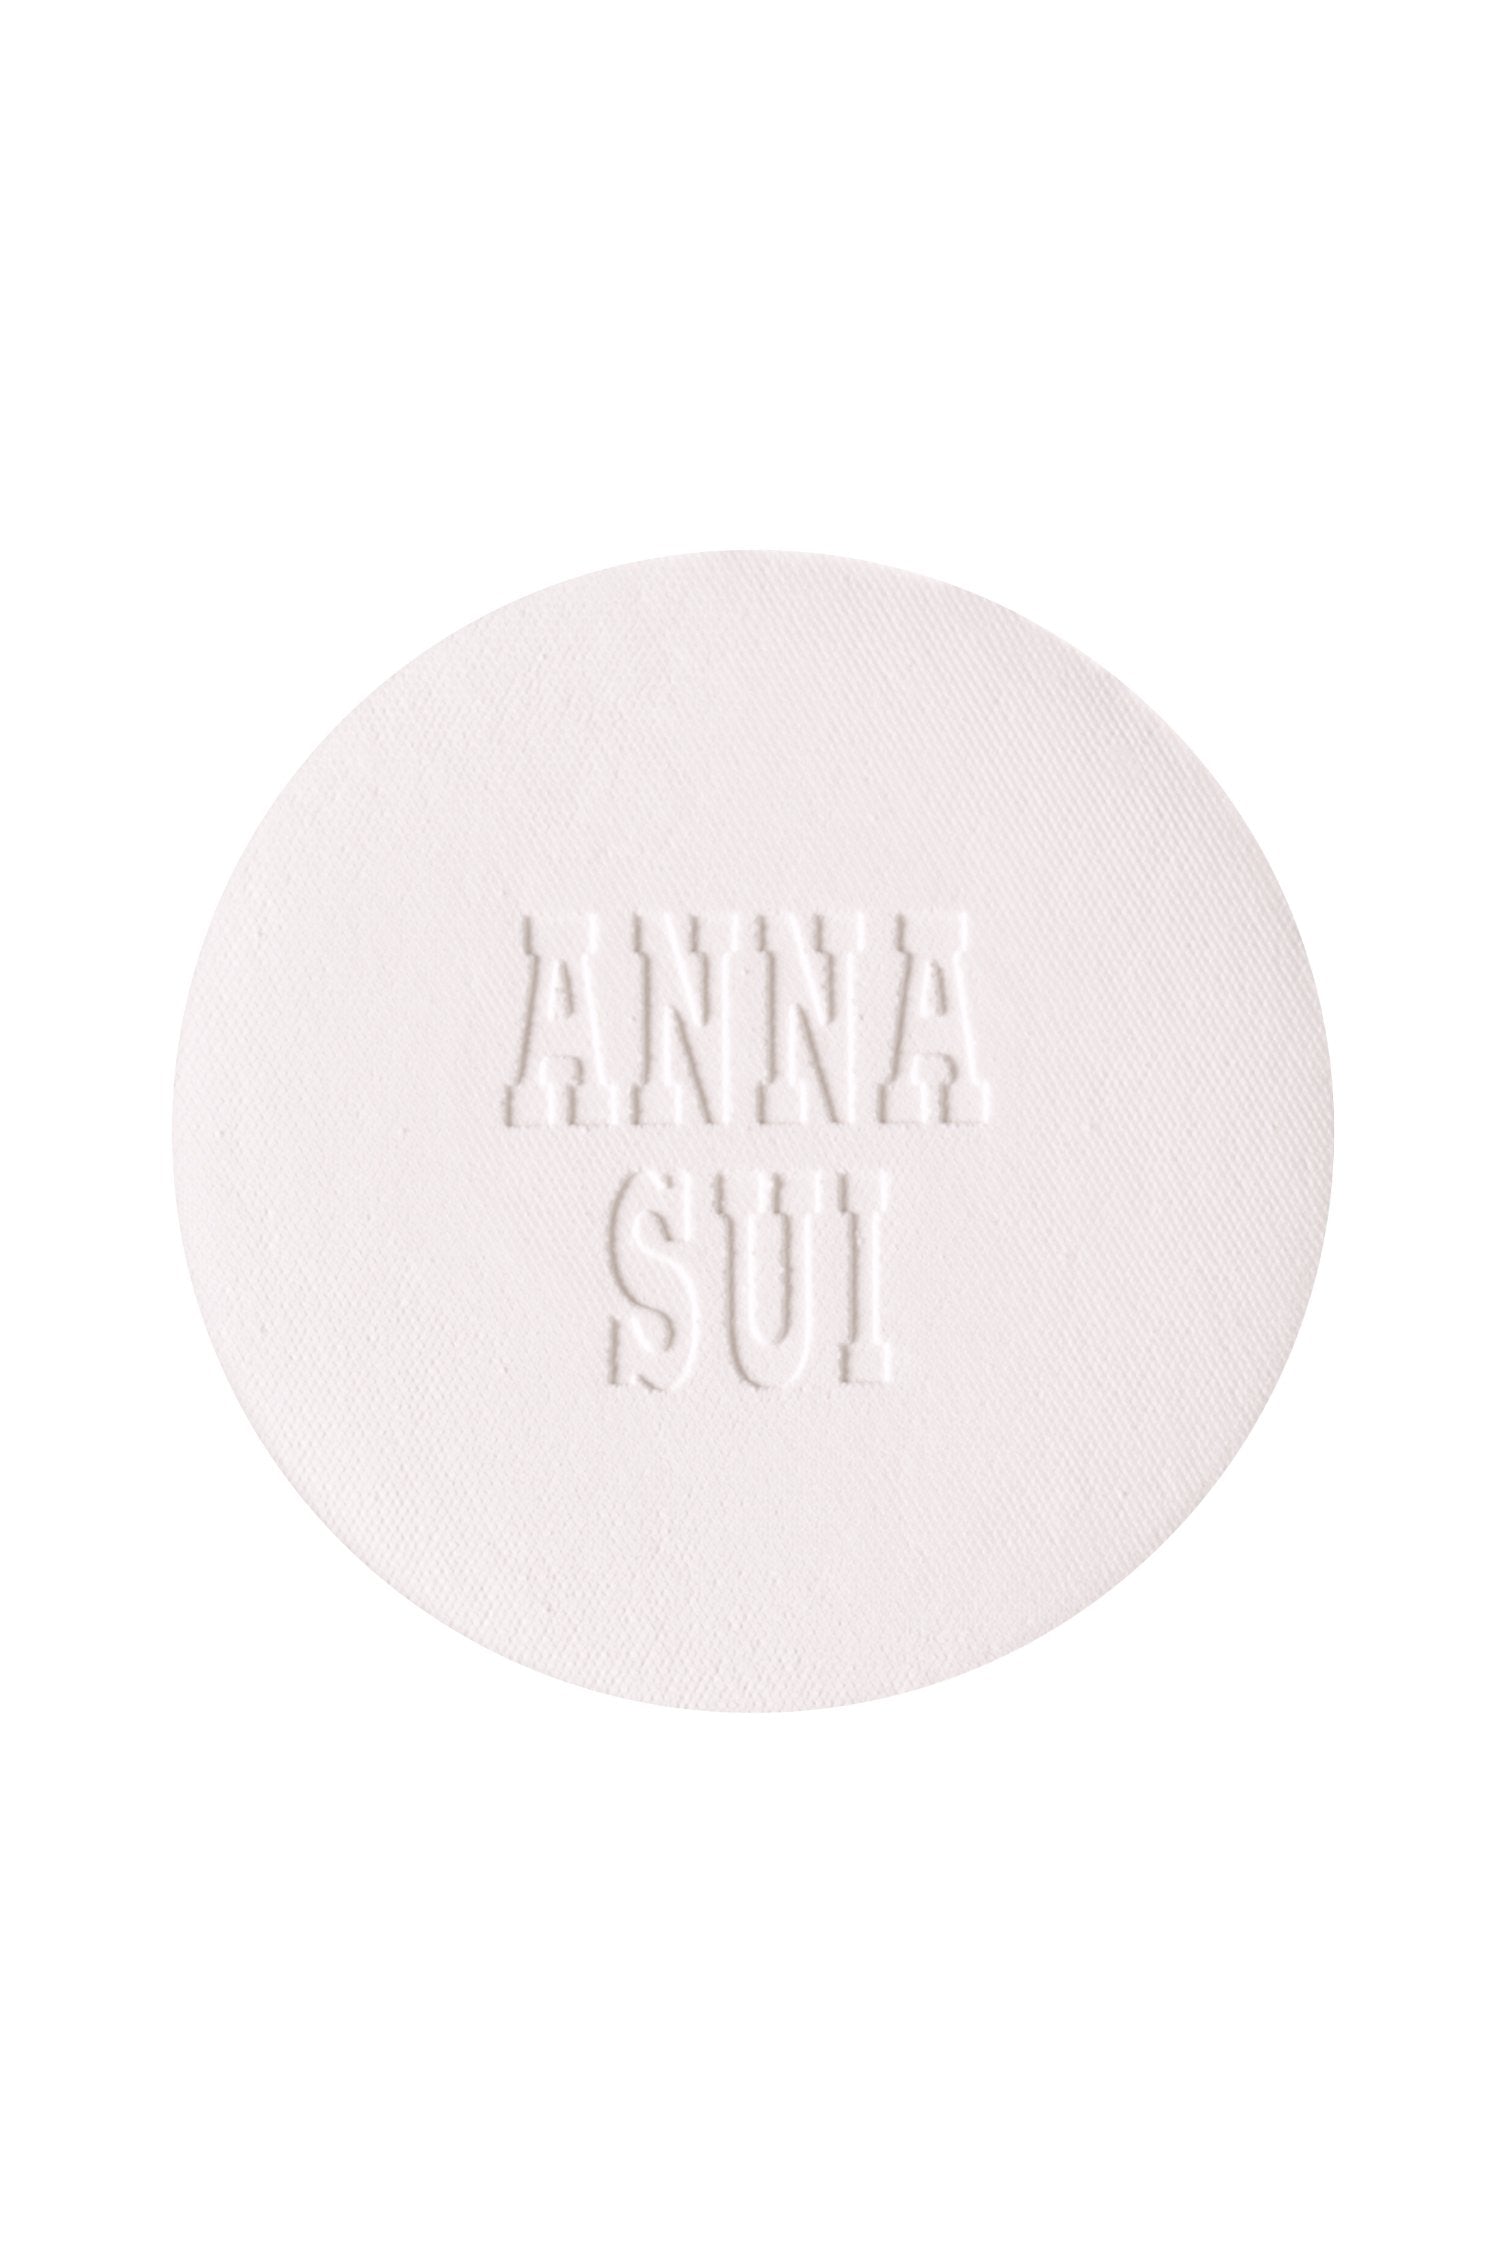 A round powder refill with engraved Anna Sui